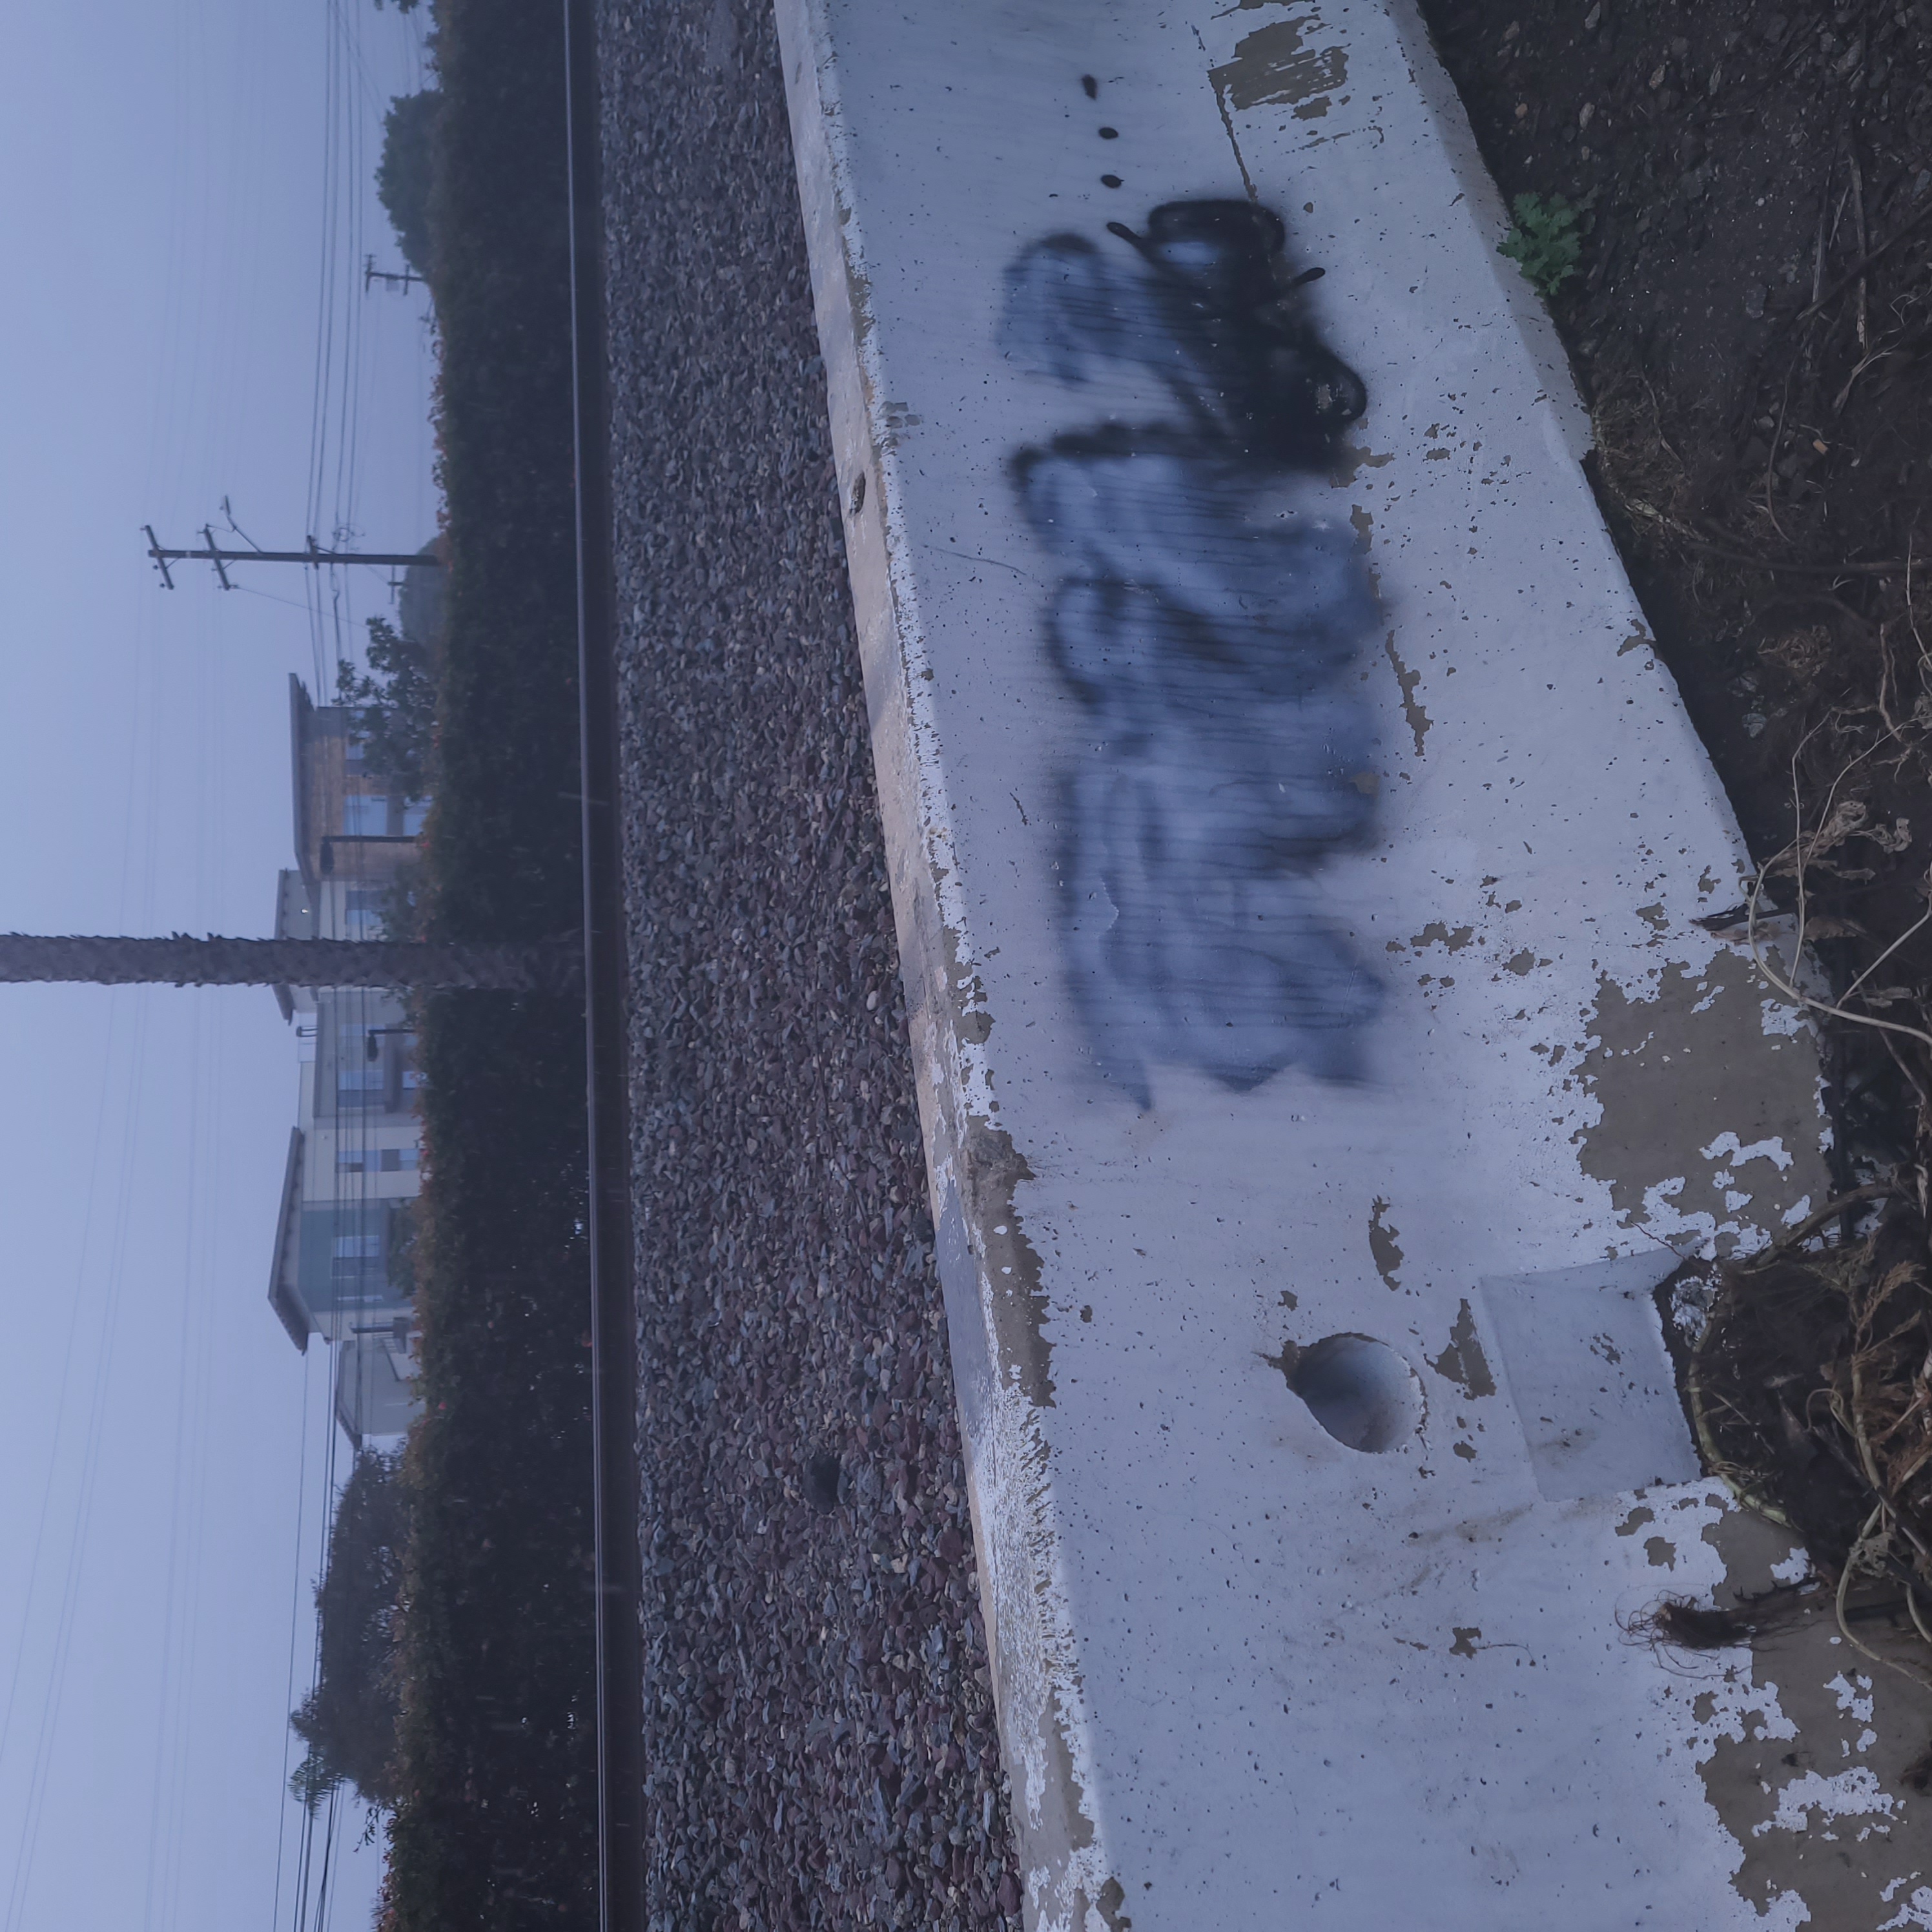 photo of graffiti on a barrier by the train tracks